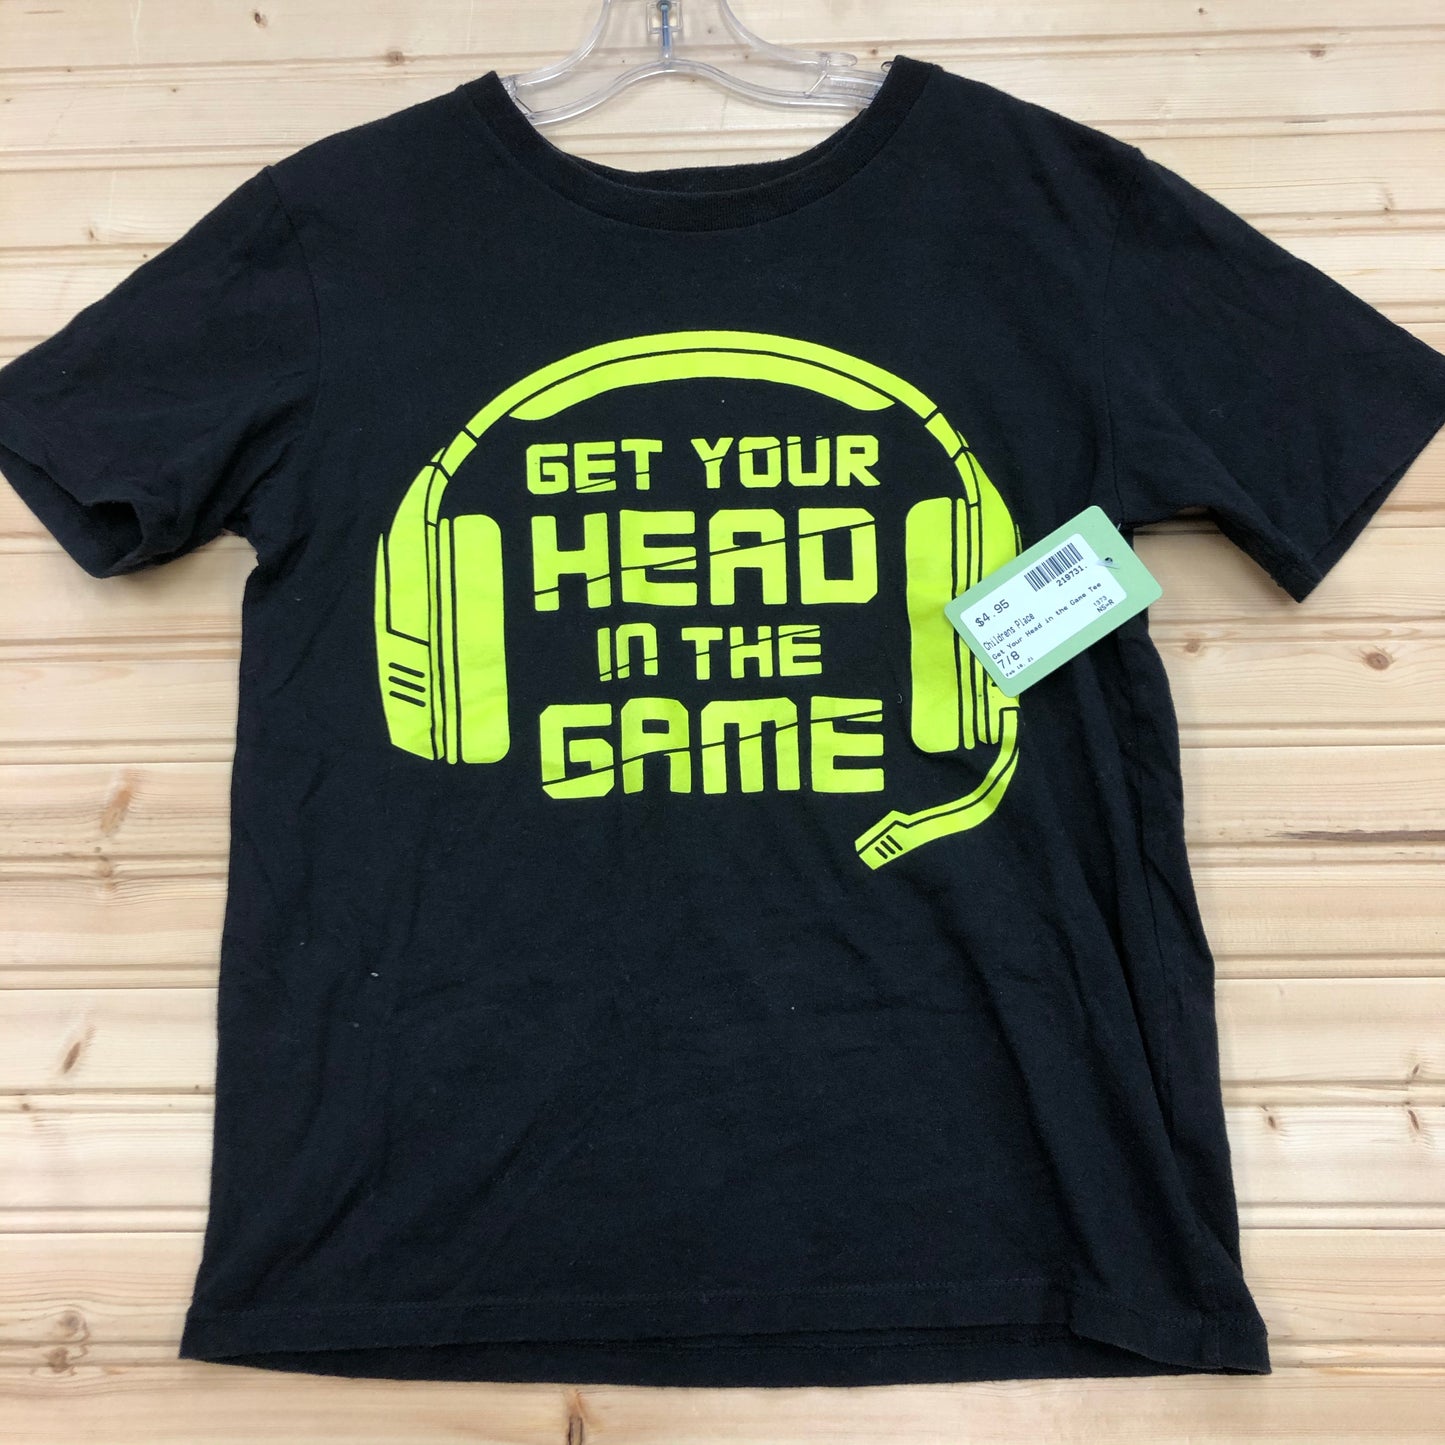 Get Your Head in the Game Tee